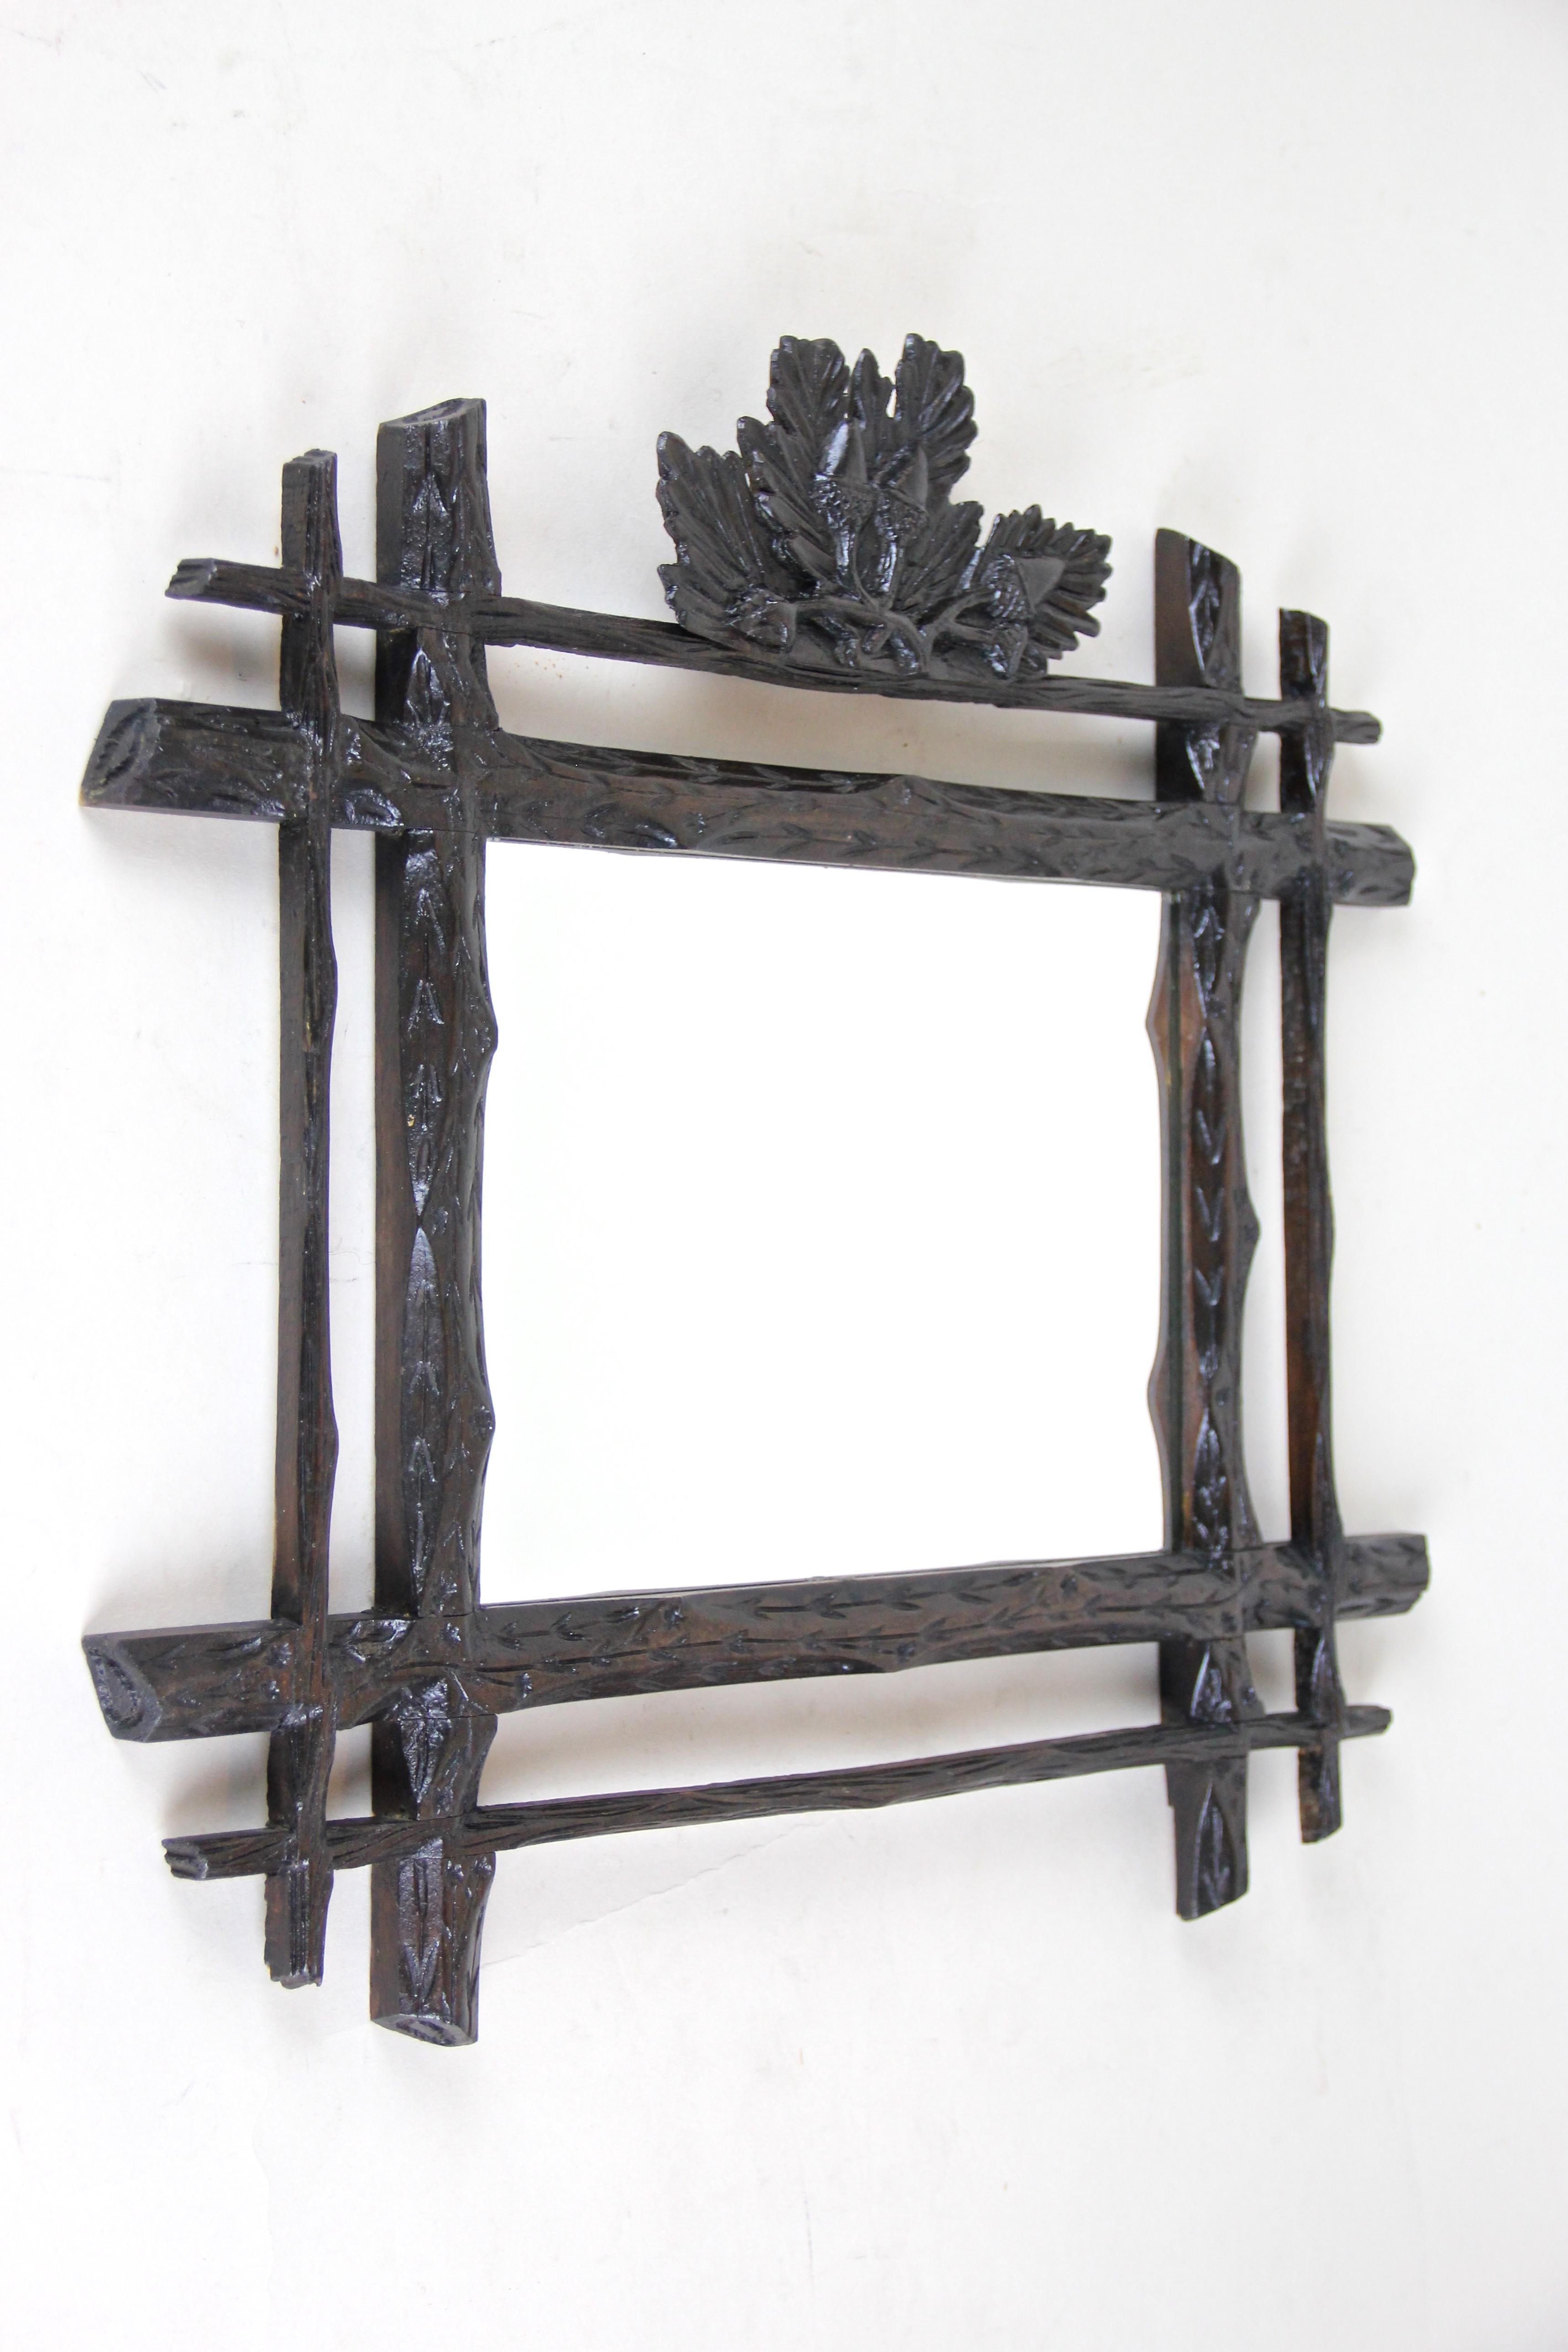 Small rustic Black Forest wall mirror from the late 19th century in Austria, circa 1880. A lovely wall mirror impressing with its roughly carved basswood double frame which shows delicate engraved flowers and blades of grass everywhere. A dark brown